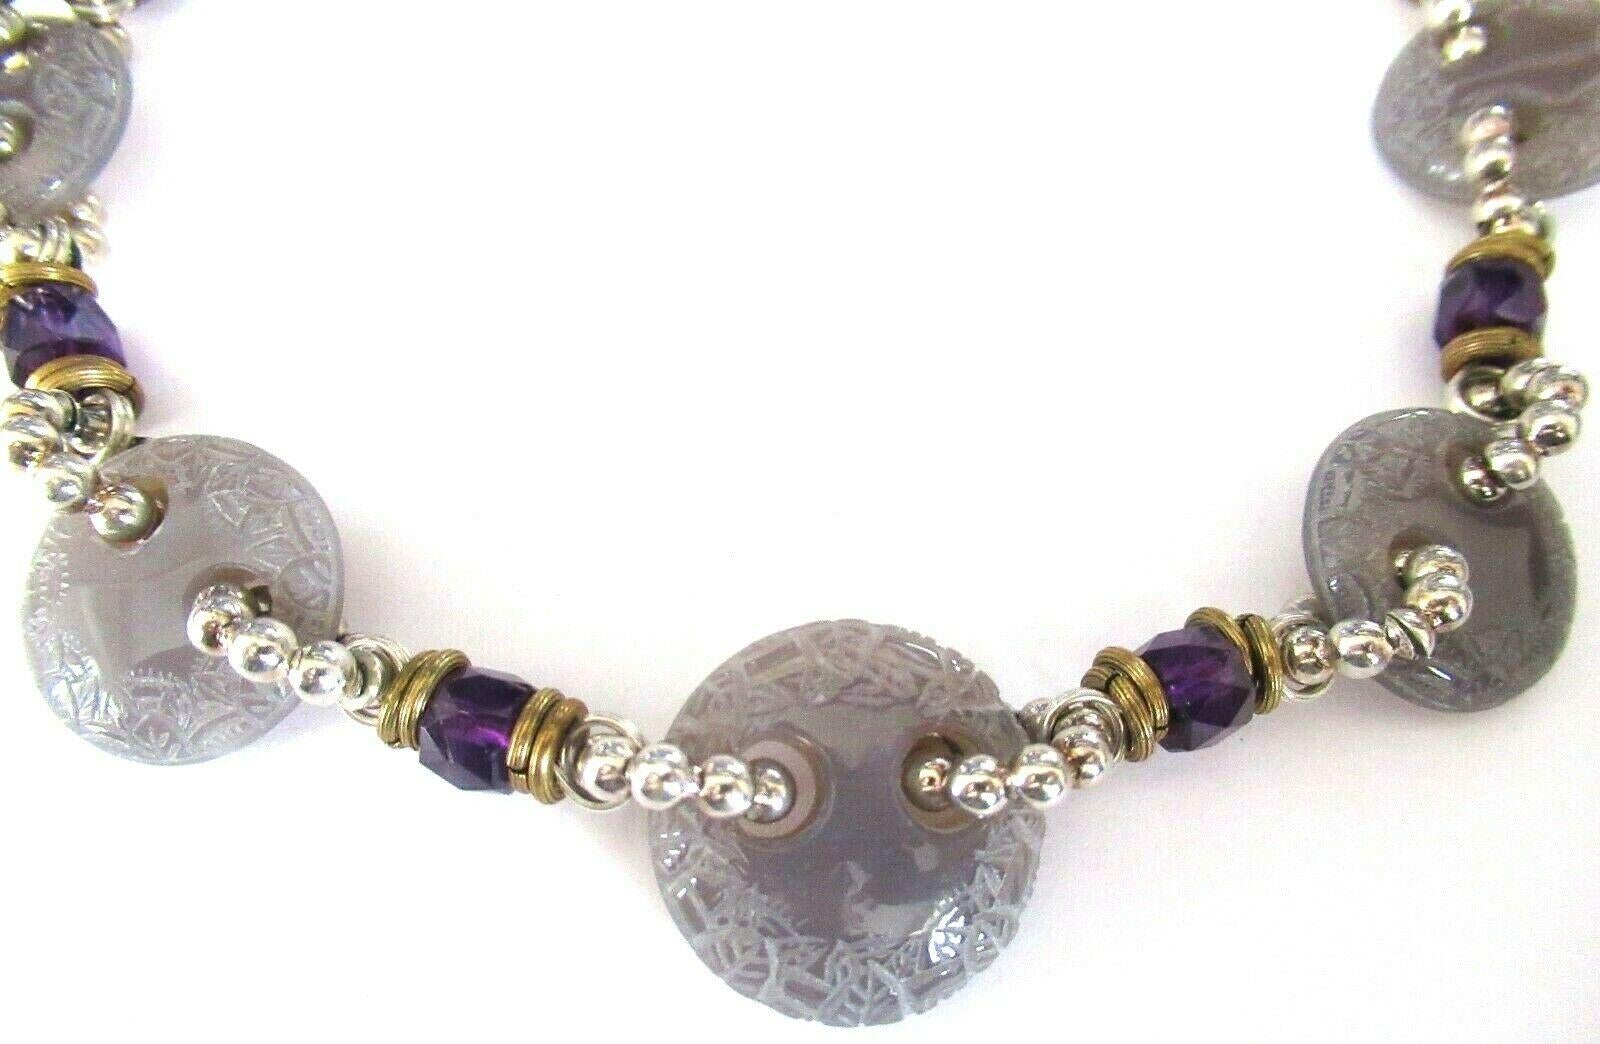 Designer Signed Stephen Dweck Choker Necklace. Genuine Purple Amethyst Crystals inter-spaced with Carved Light Purple Stone Discs and Sterling Silver 925 spacers. Hand crafted Necklace measures approx. 19